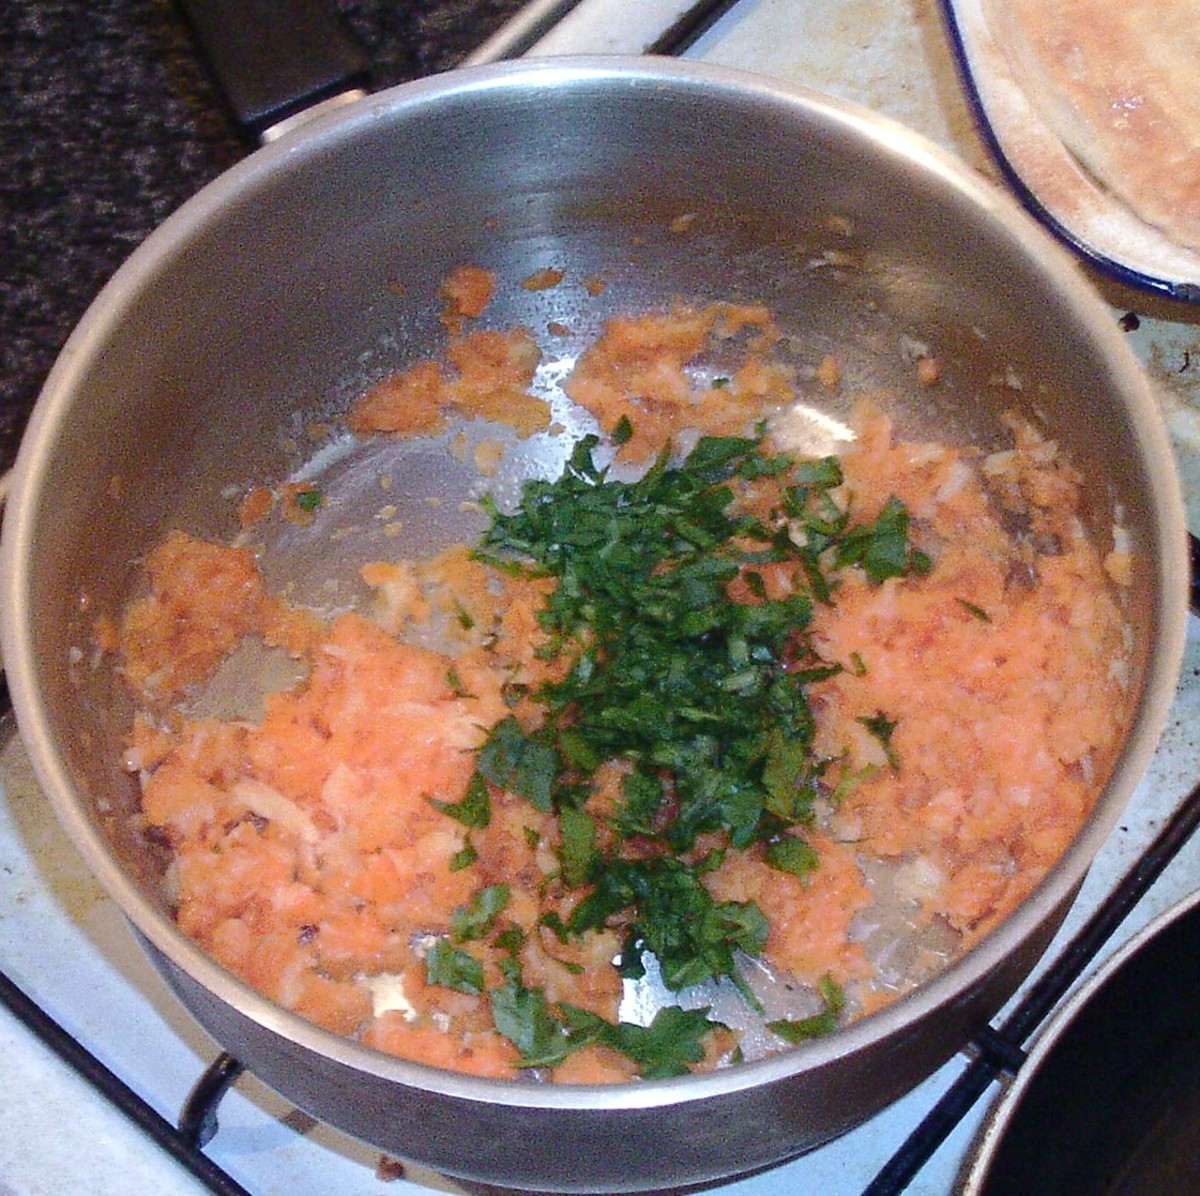 Chopped parsley is added to mashed carrot and parsnip.